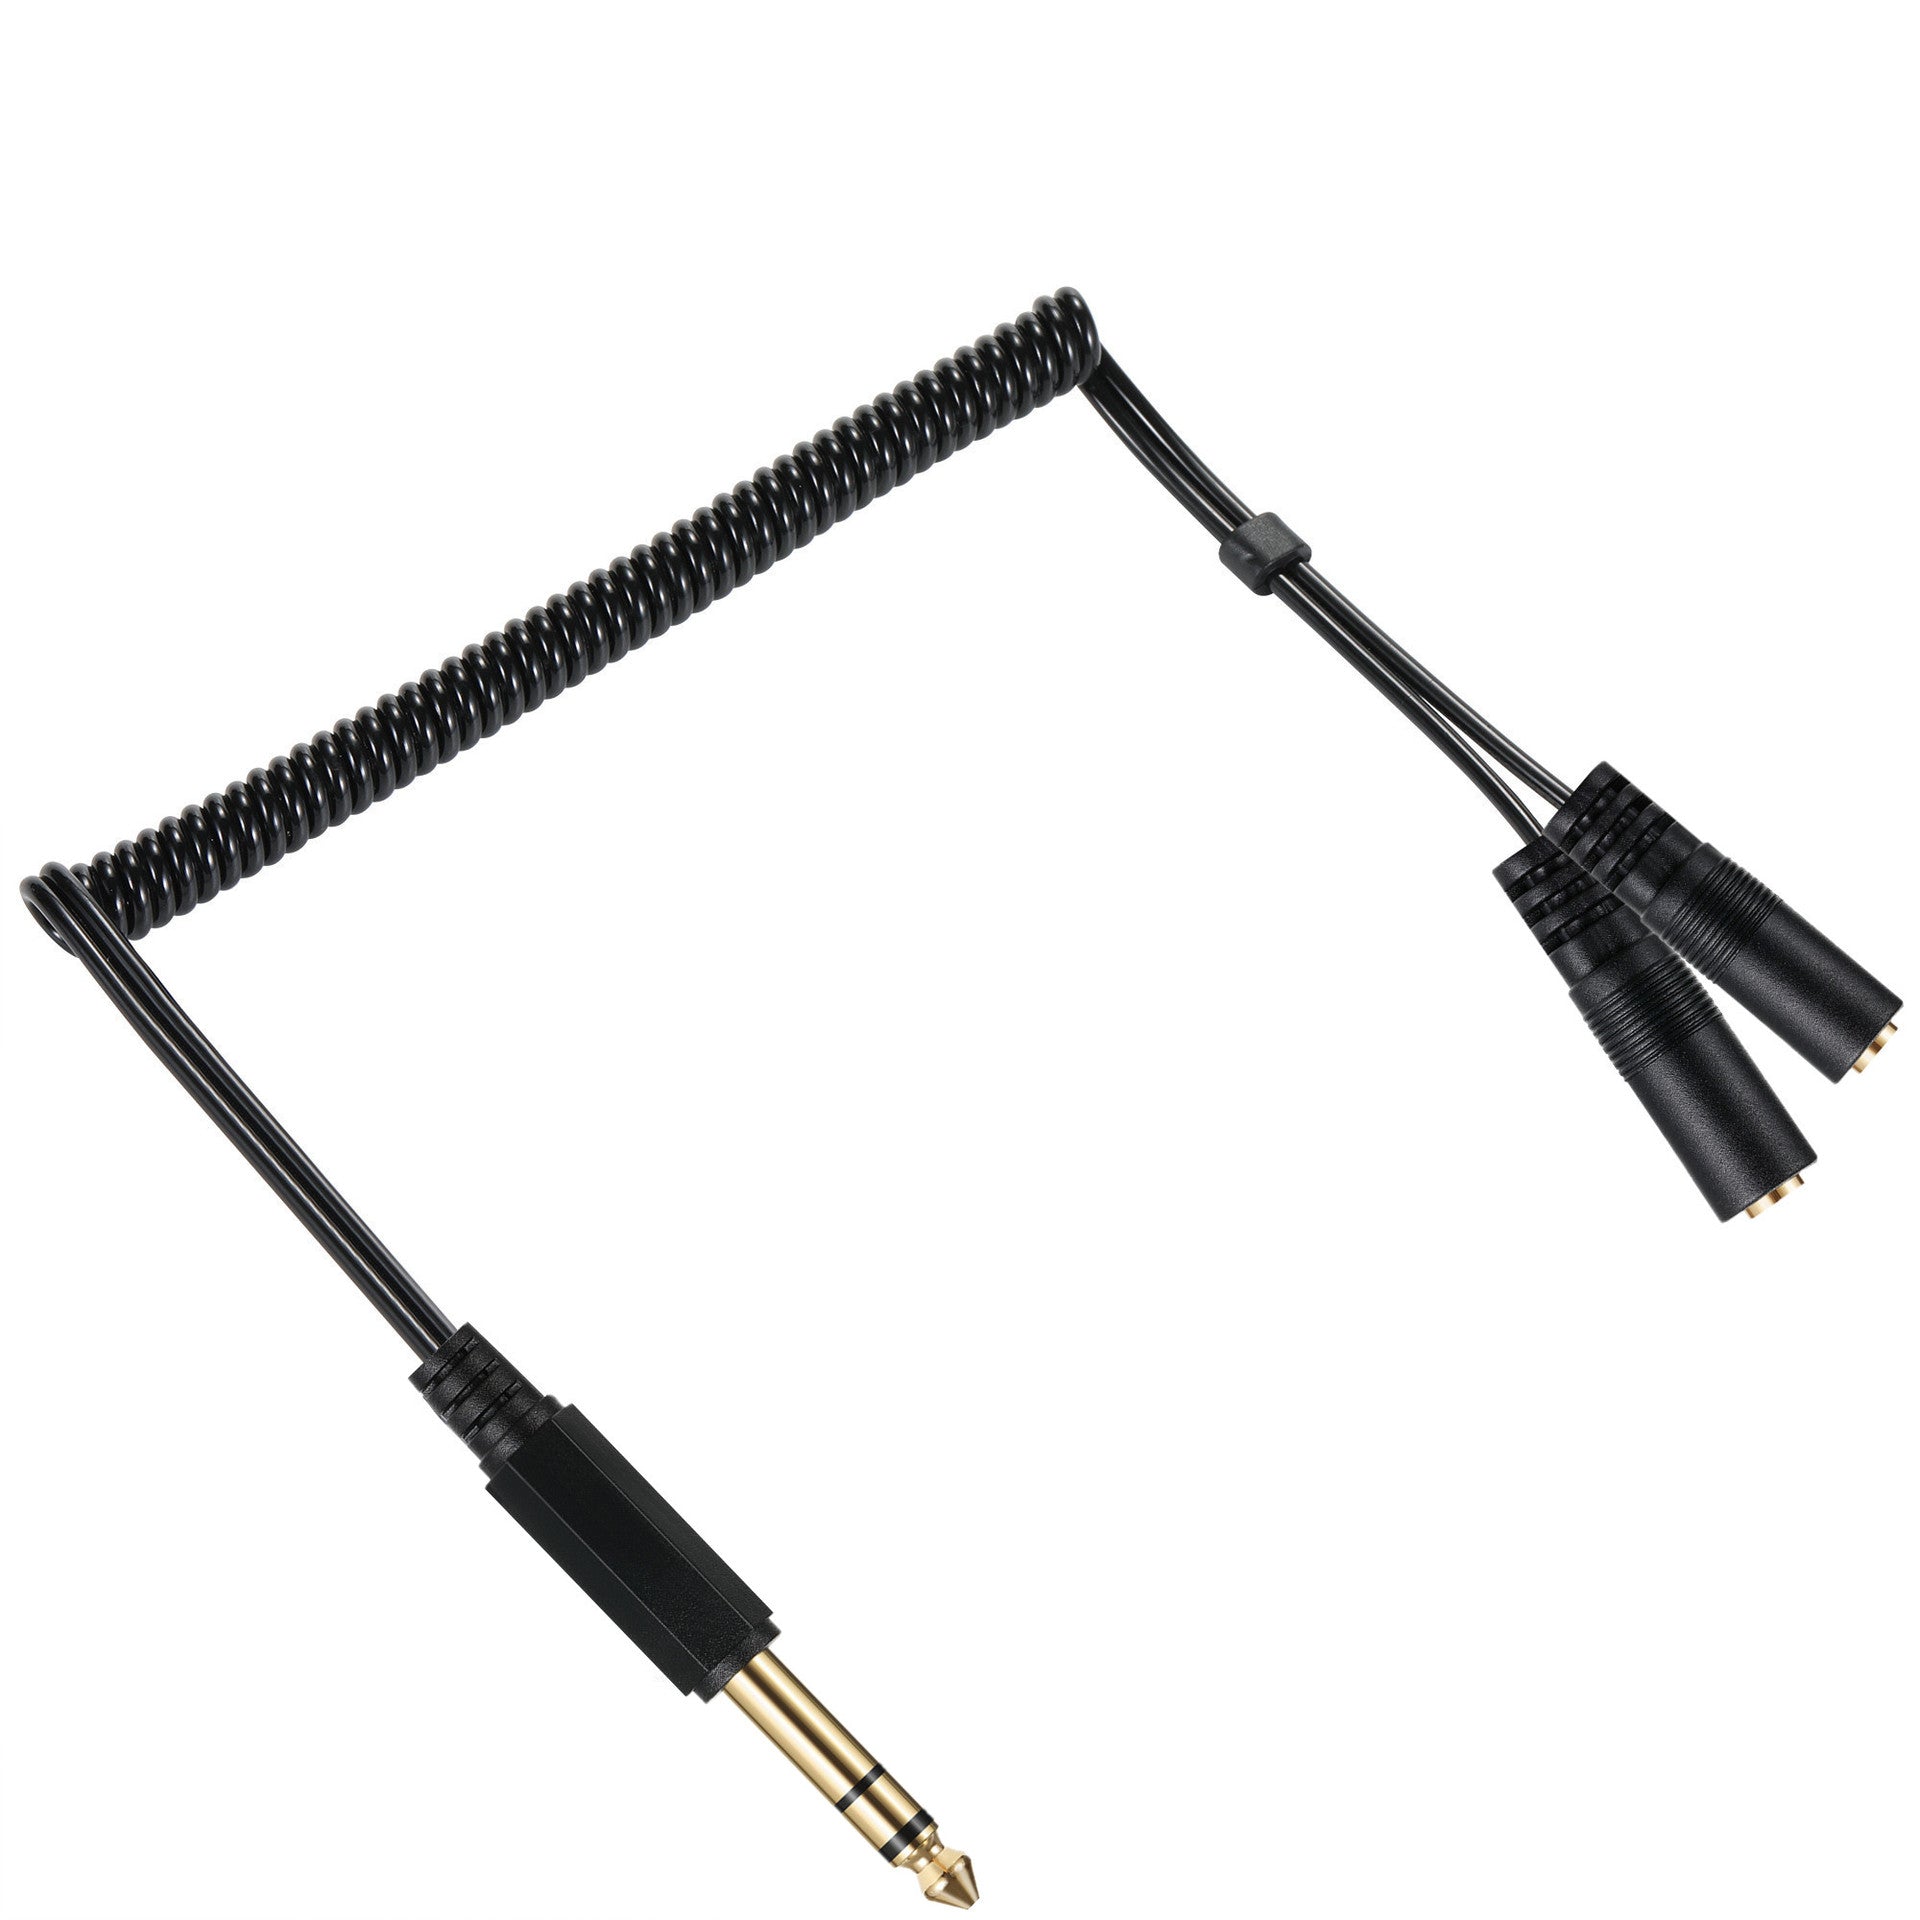 6.35mm 1/4 inch TRS Stereo to Dual 3.5mm (Mini) 1/8" Stereo Y Splitter Cable